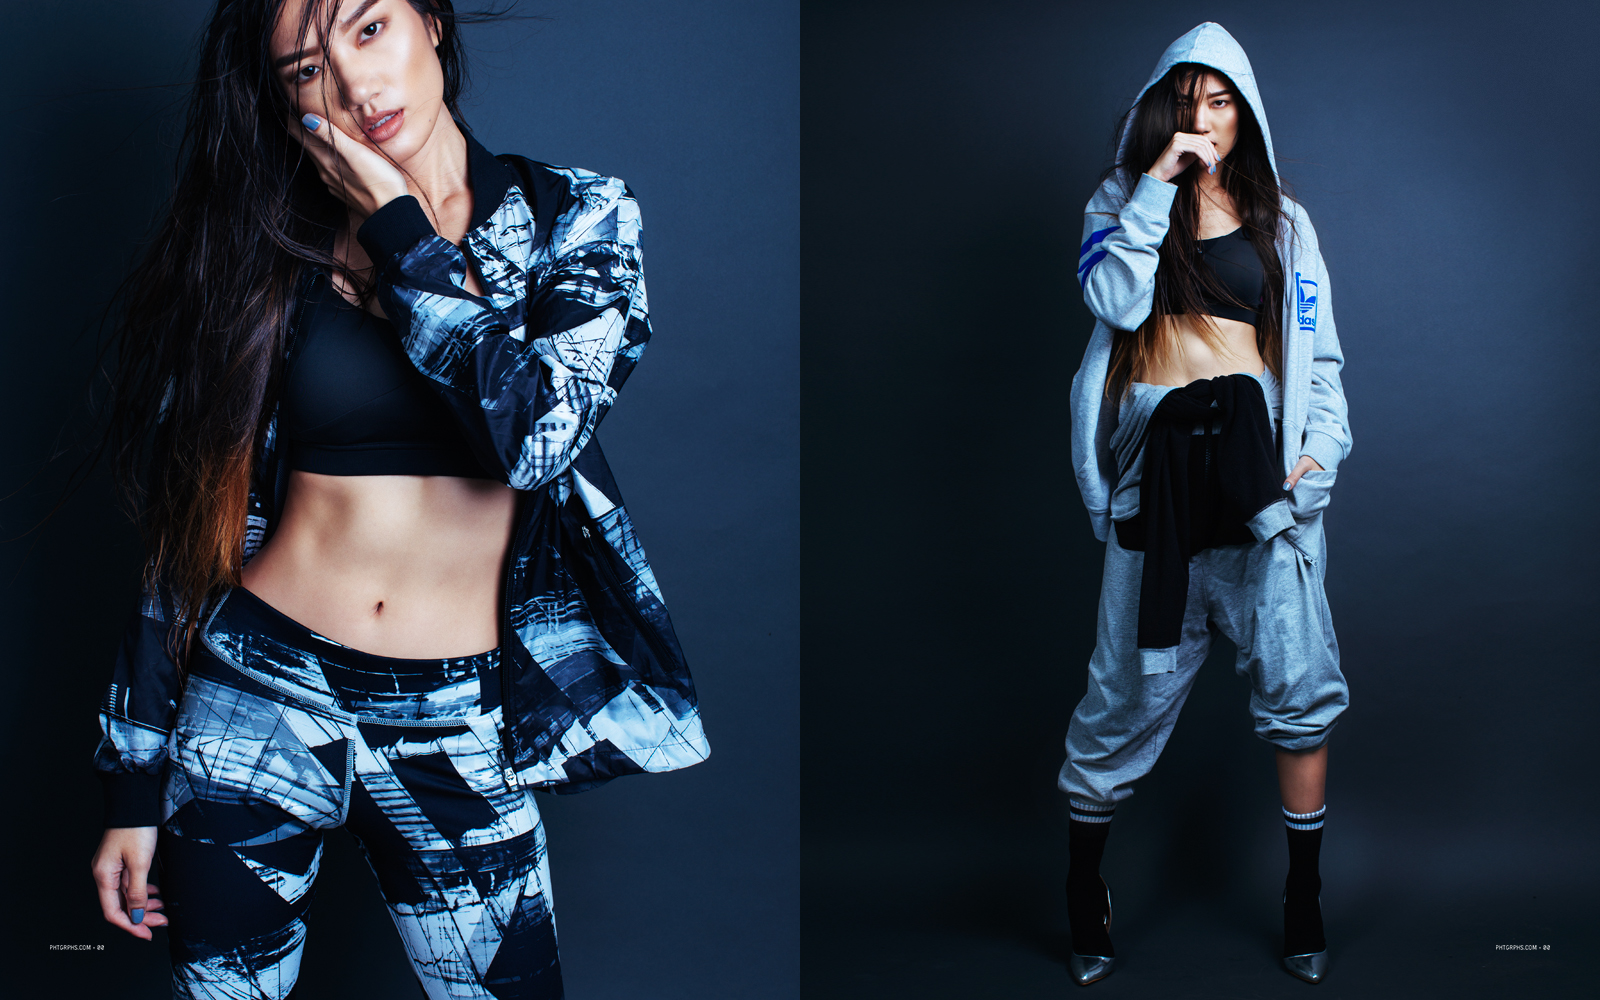 MODEL FEATURE: JESSICA YANG IS ON A NEW MOVEMENT